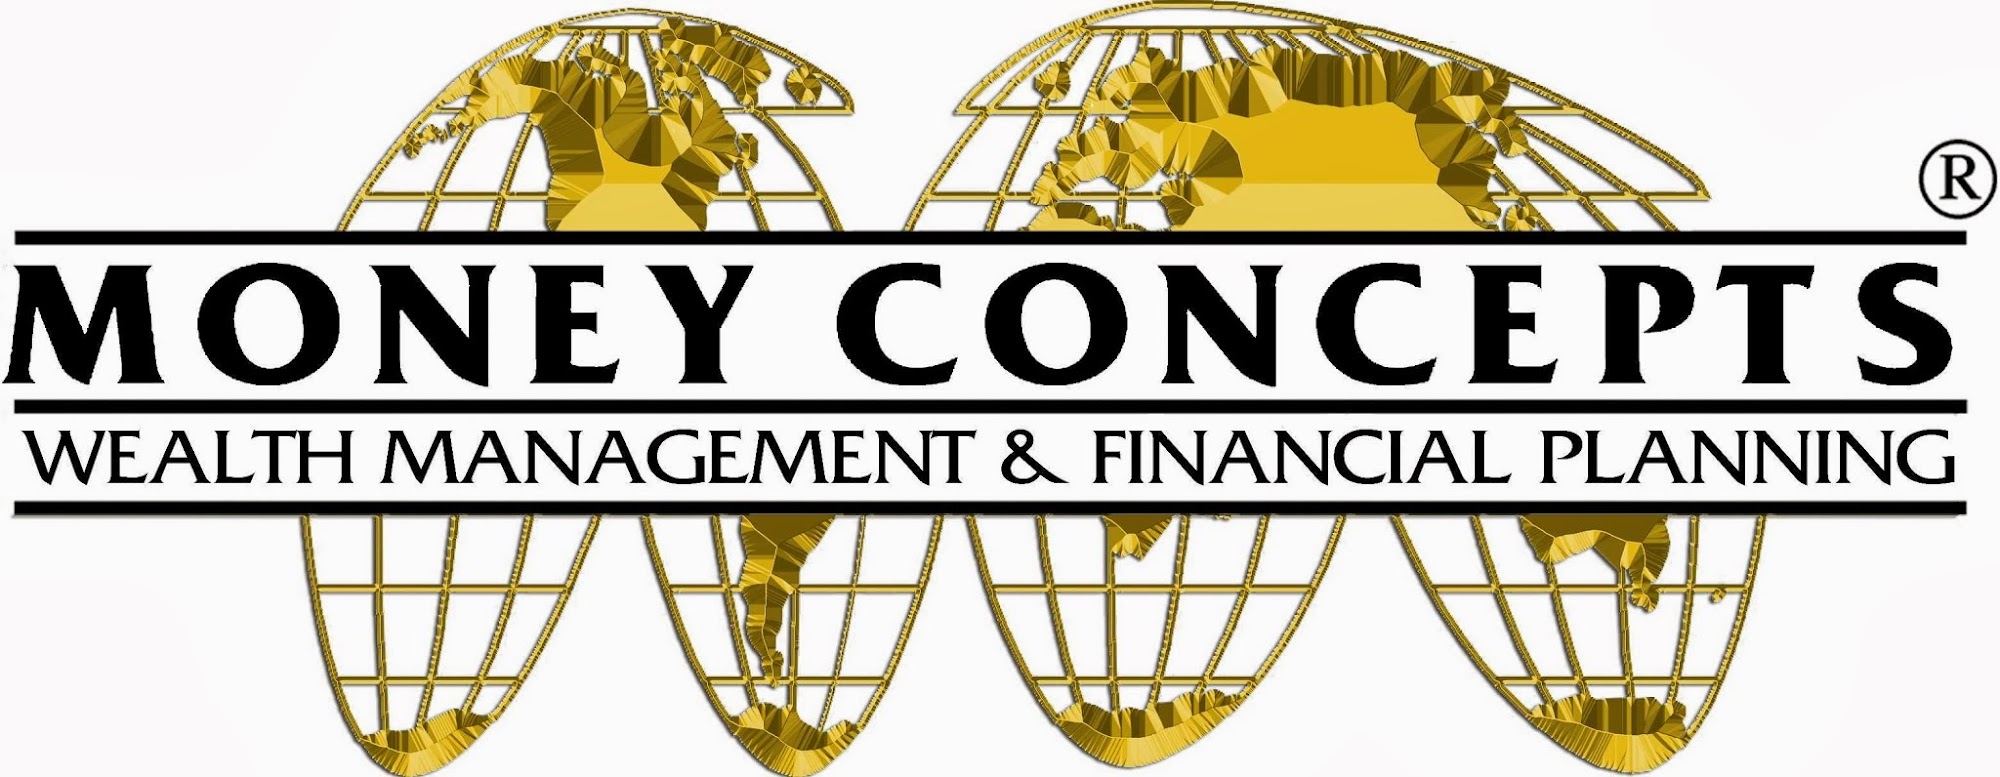 Money Concepts - The Planning Firm 103 S Main Ave, Sioux Center Iowa 51250